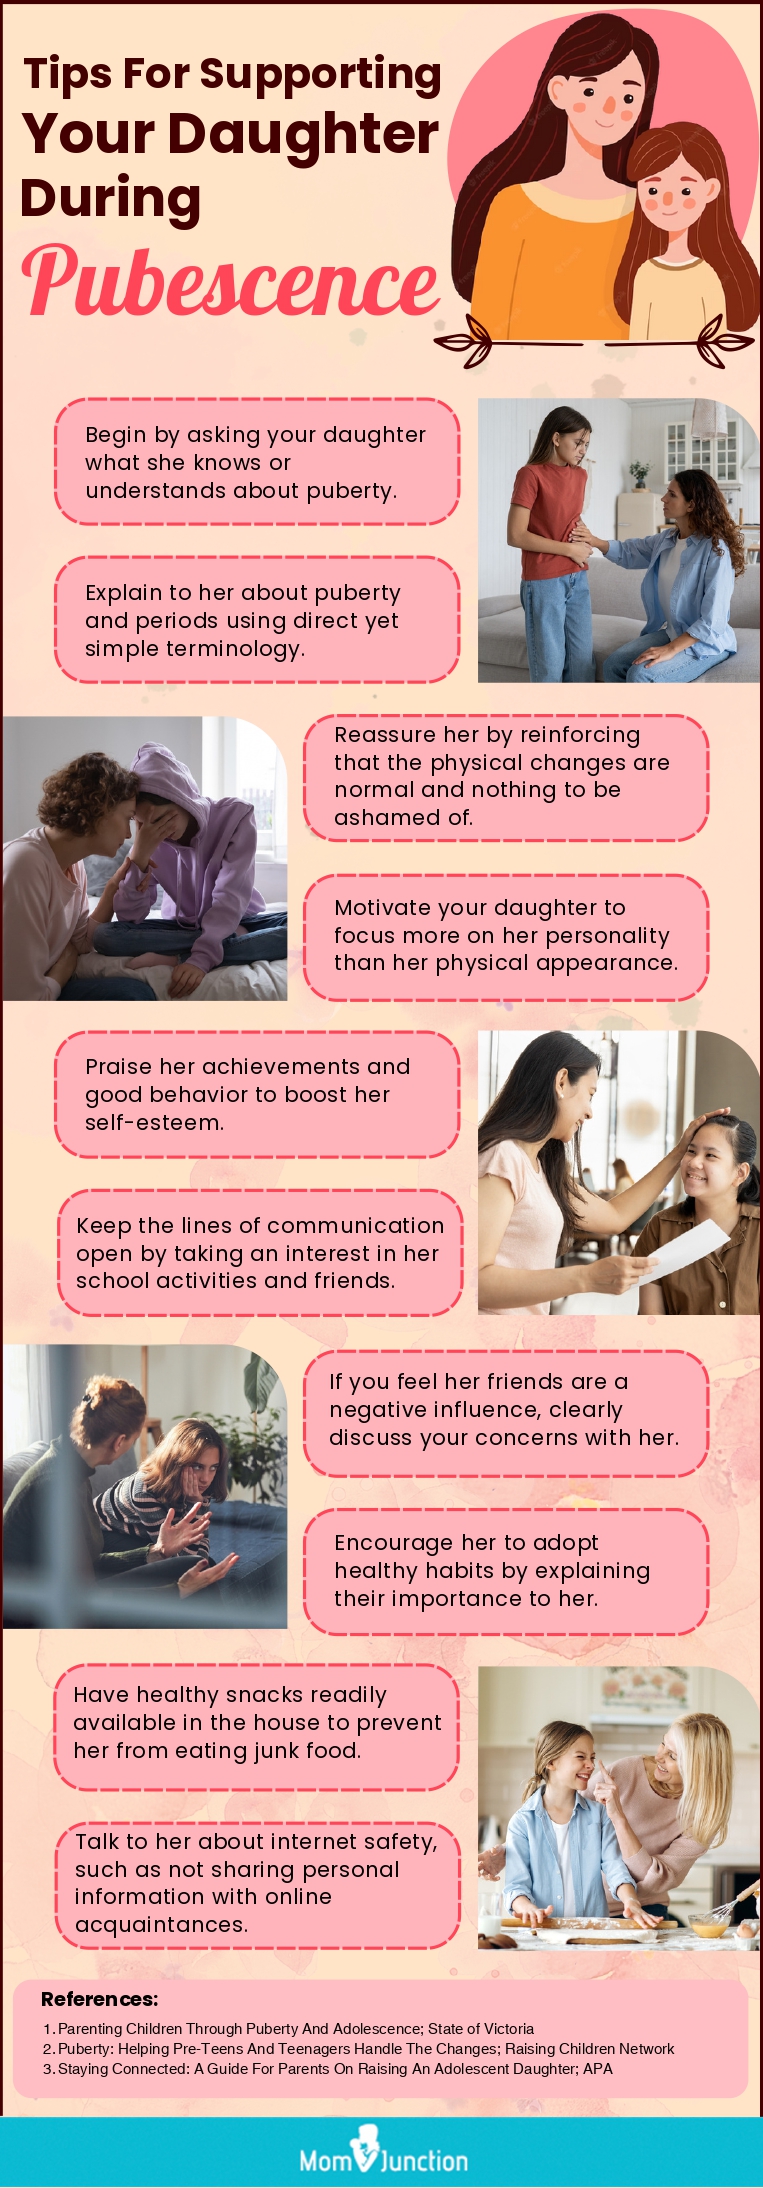 Tips For Supporting Your Daughter During Pubescence (infographic)